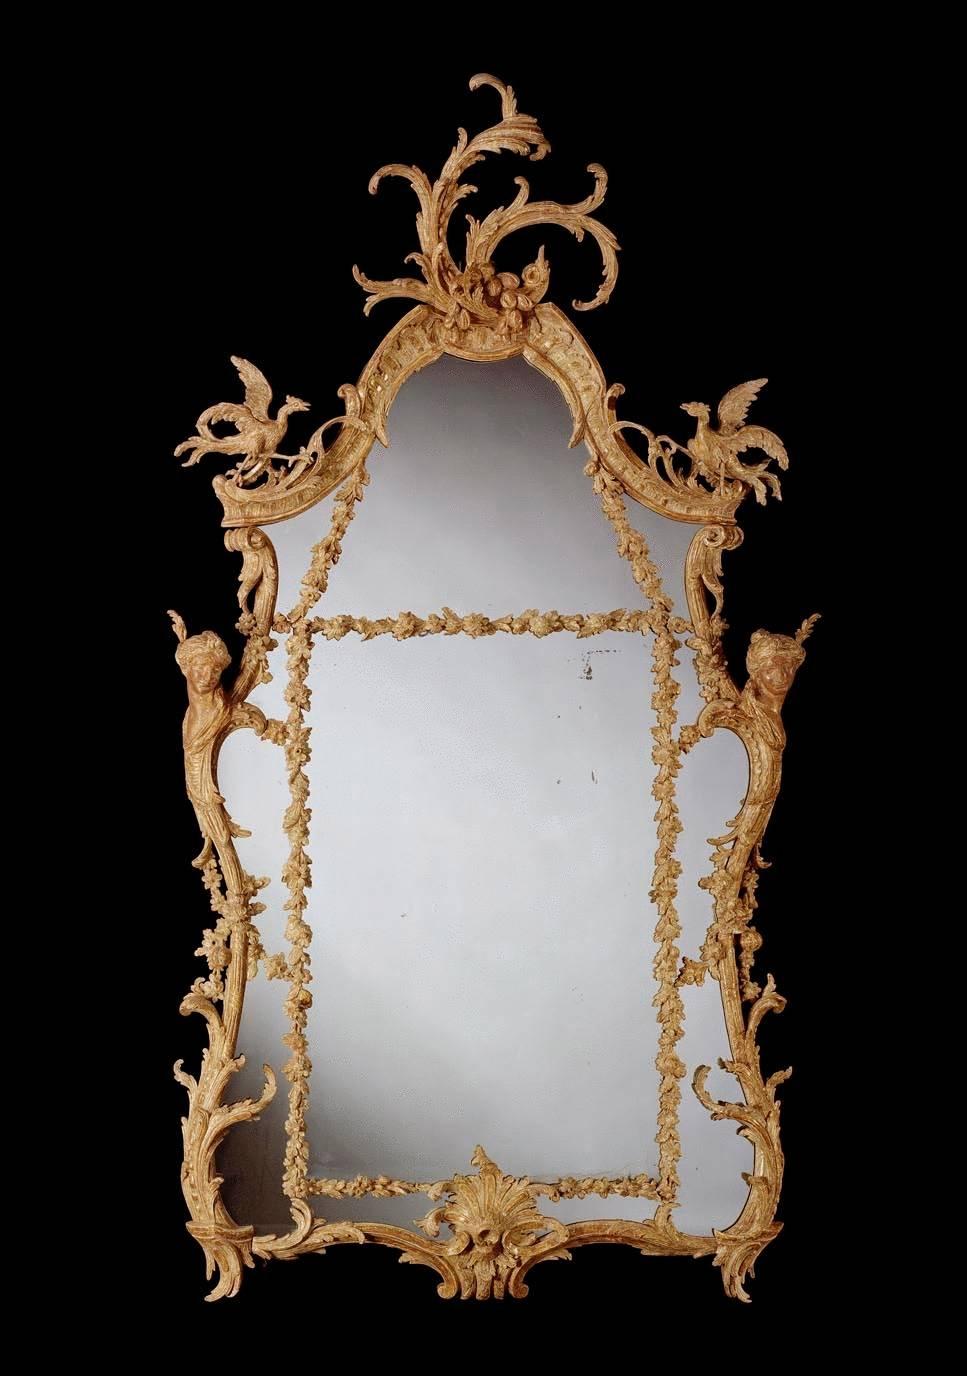 An outstanding pair of mid-18th century Chippendale period carved giltwood border glass mirrors, retaining mainly original gilding and having 18th century replaced plates divided by floral and foliate carved slips within a lobed and arched frame,